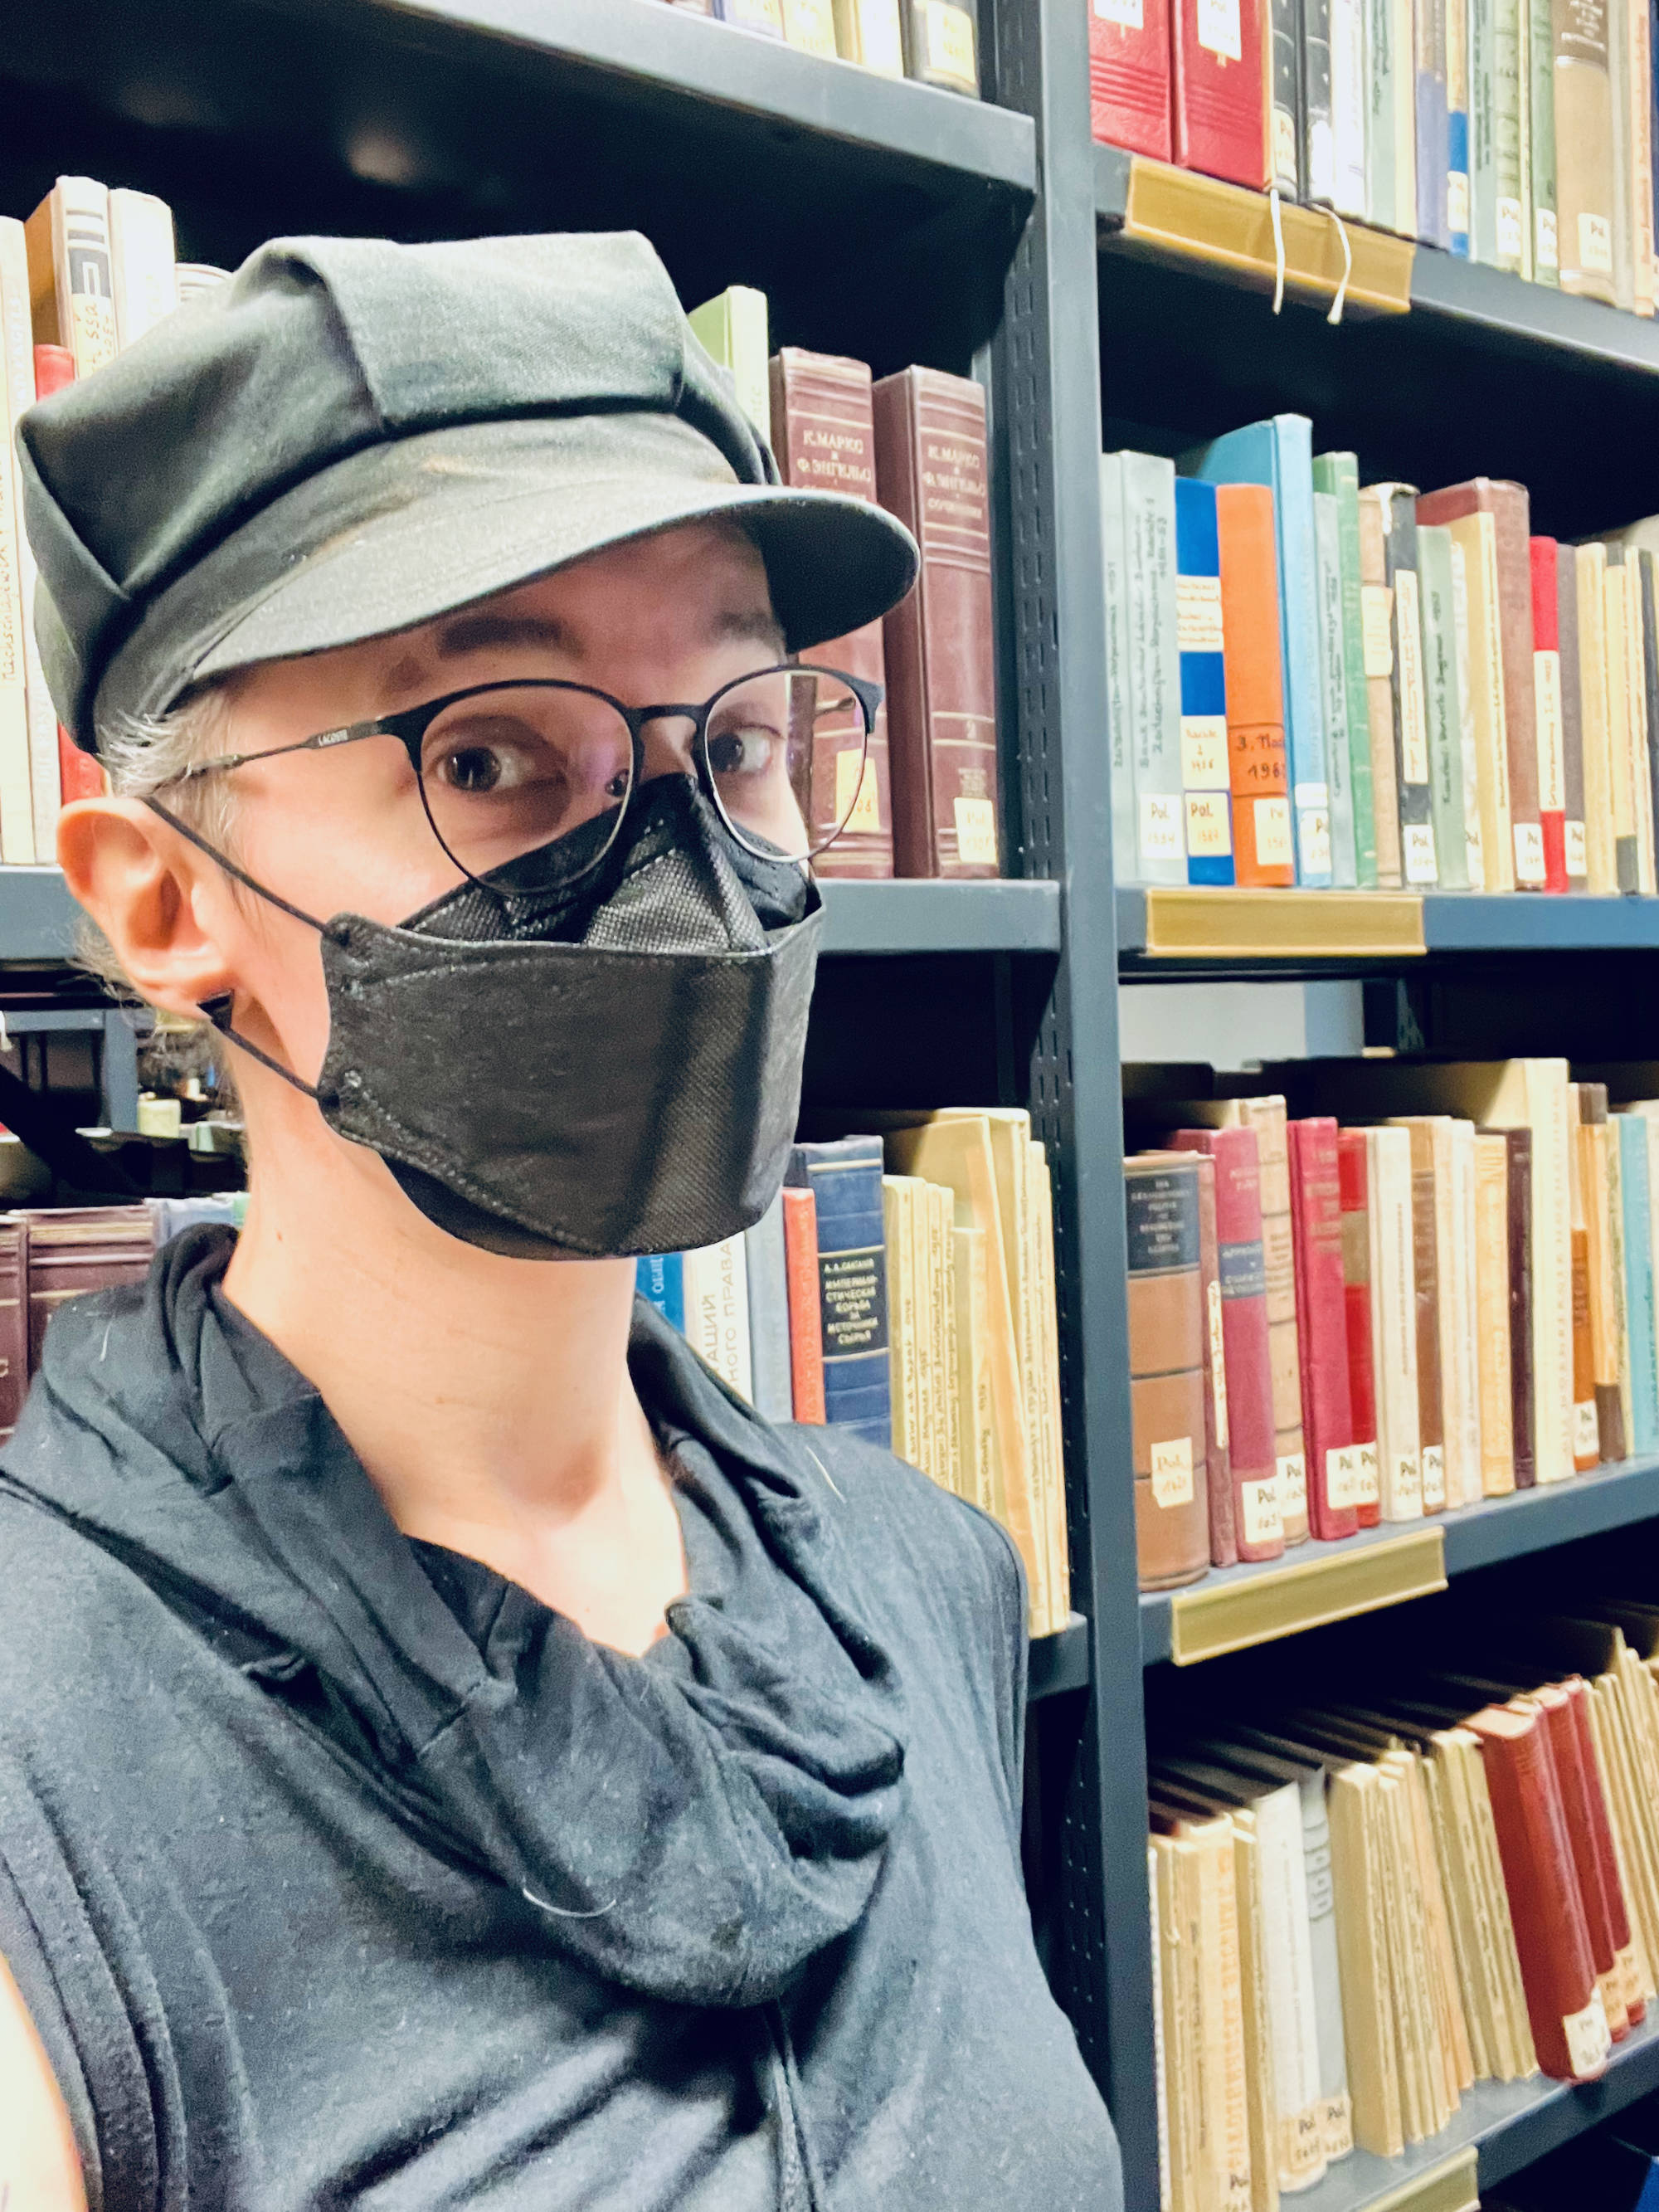 Selfie in a library full of old books